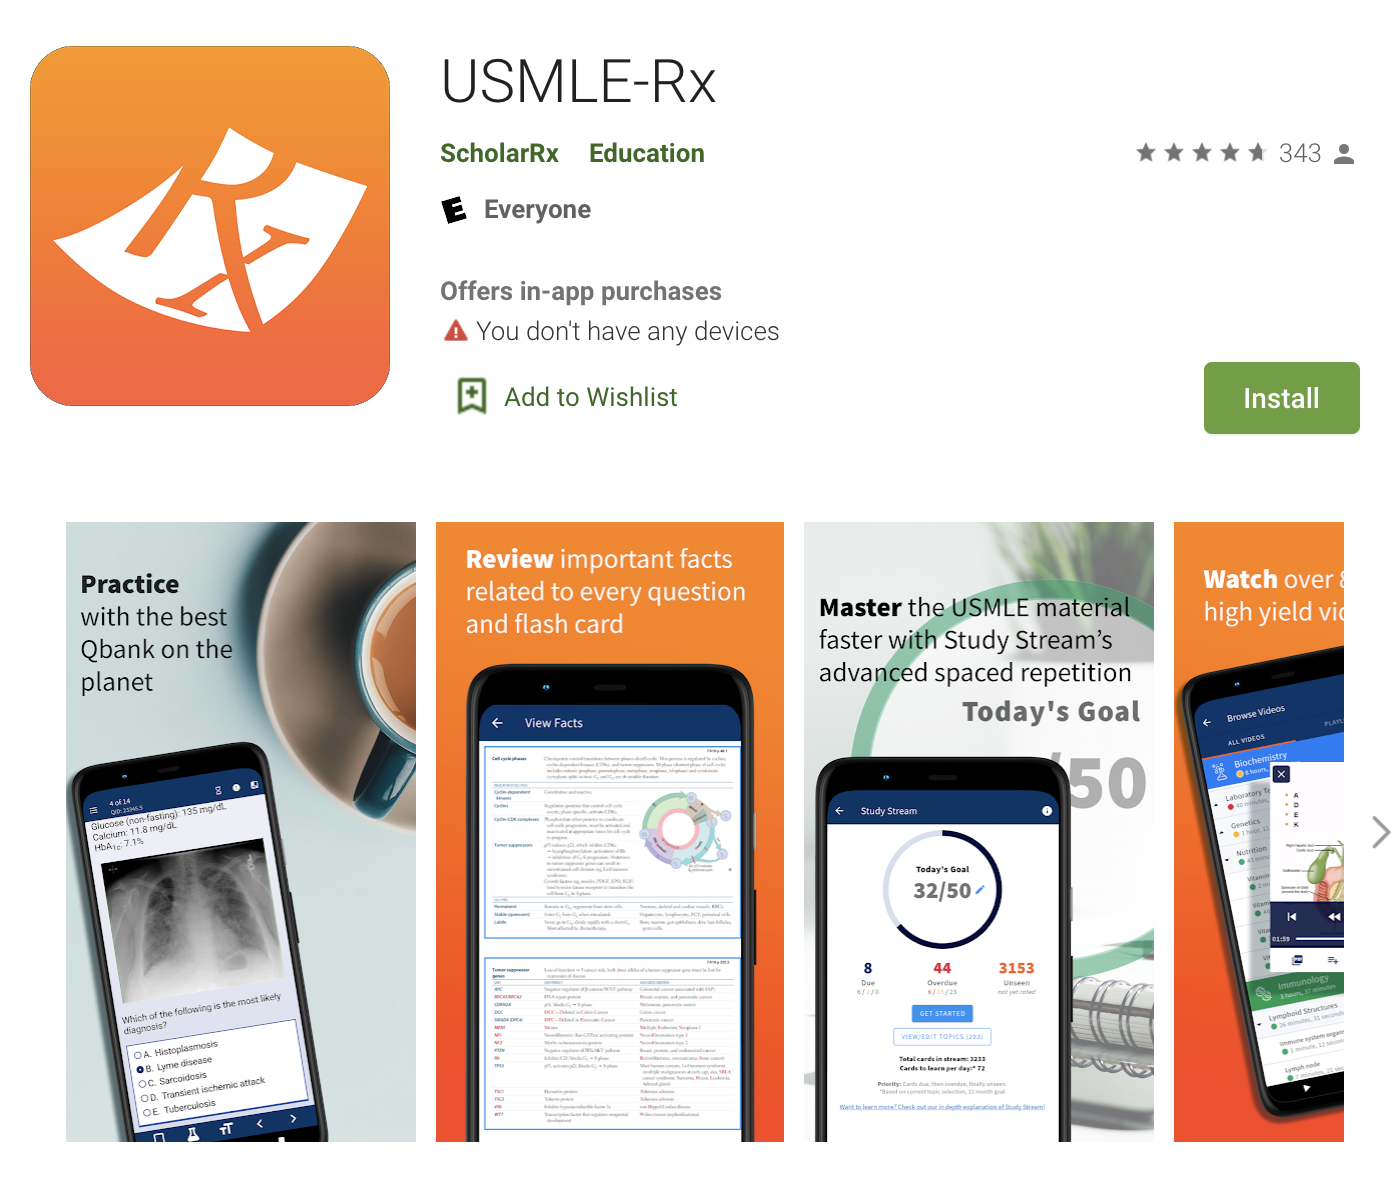 One of the Best Apps for USMLE Preparation: USMLE-Rx